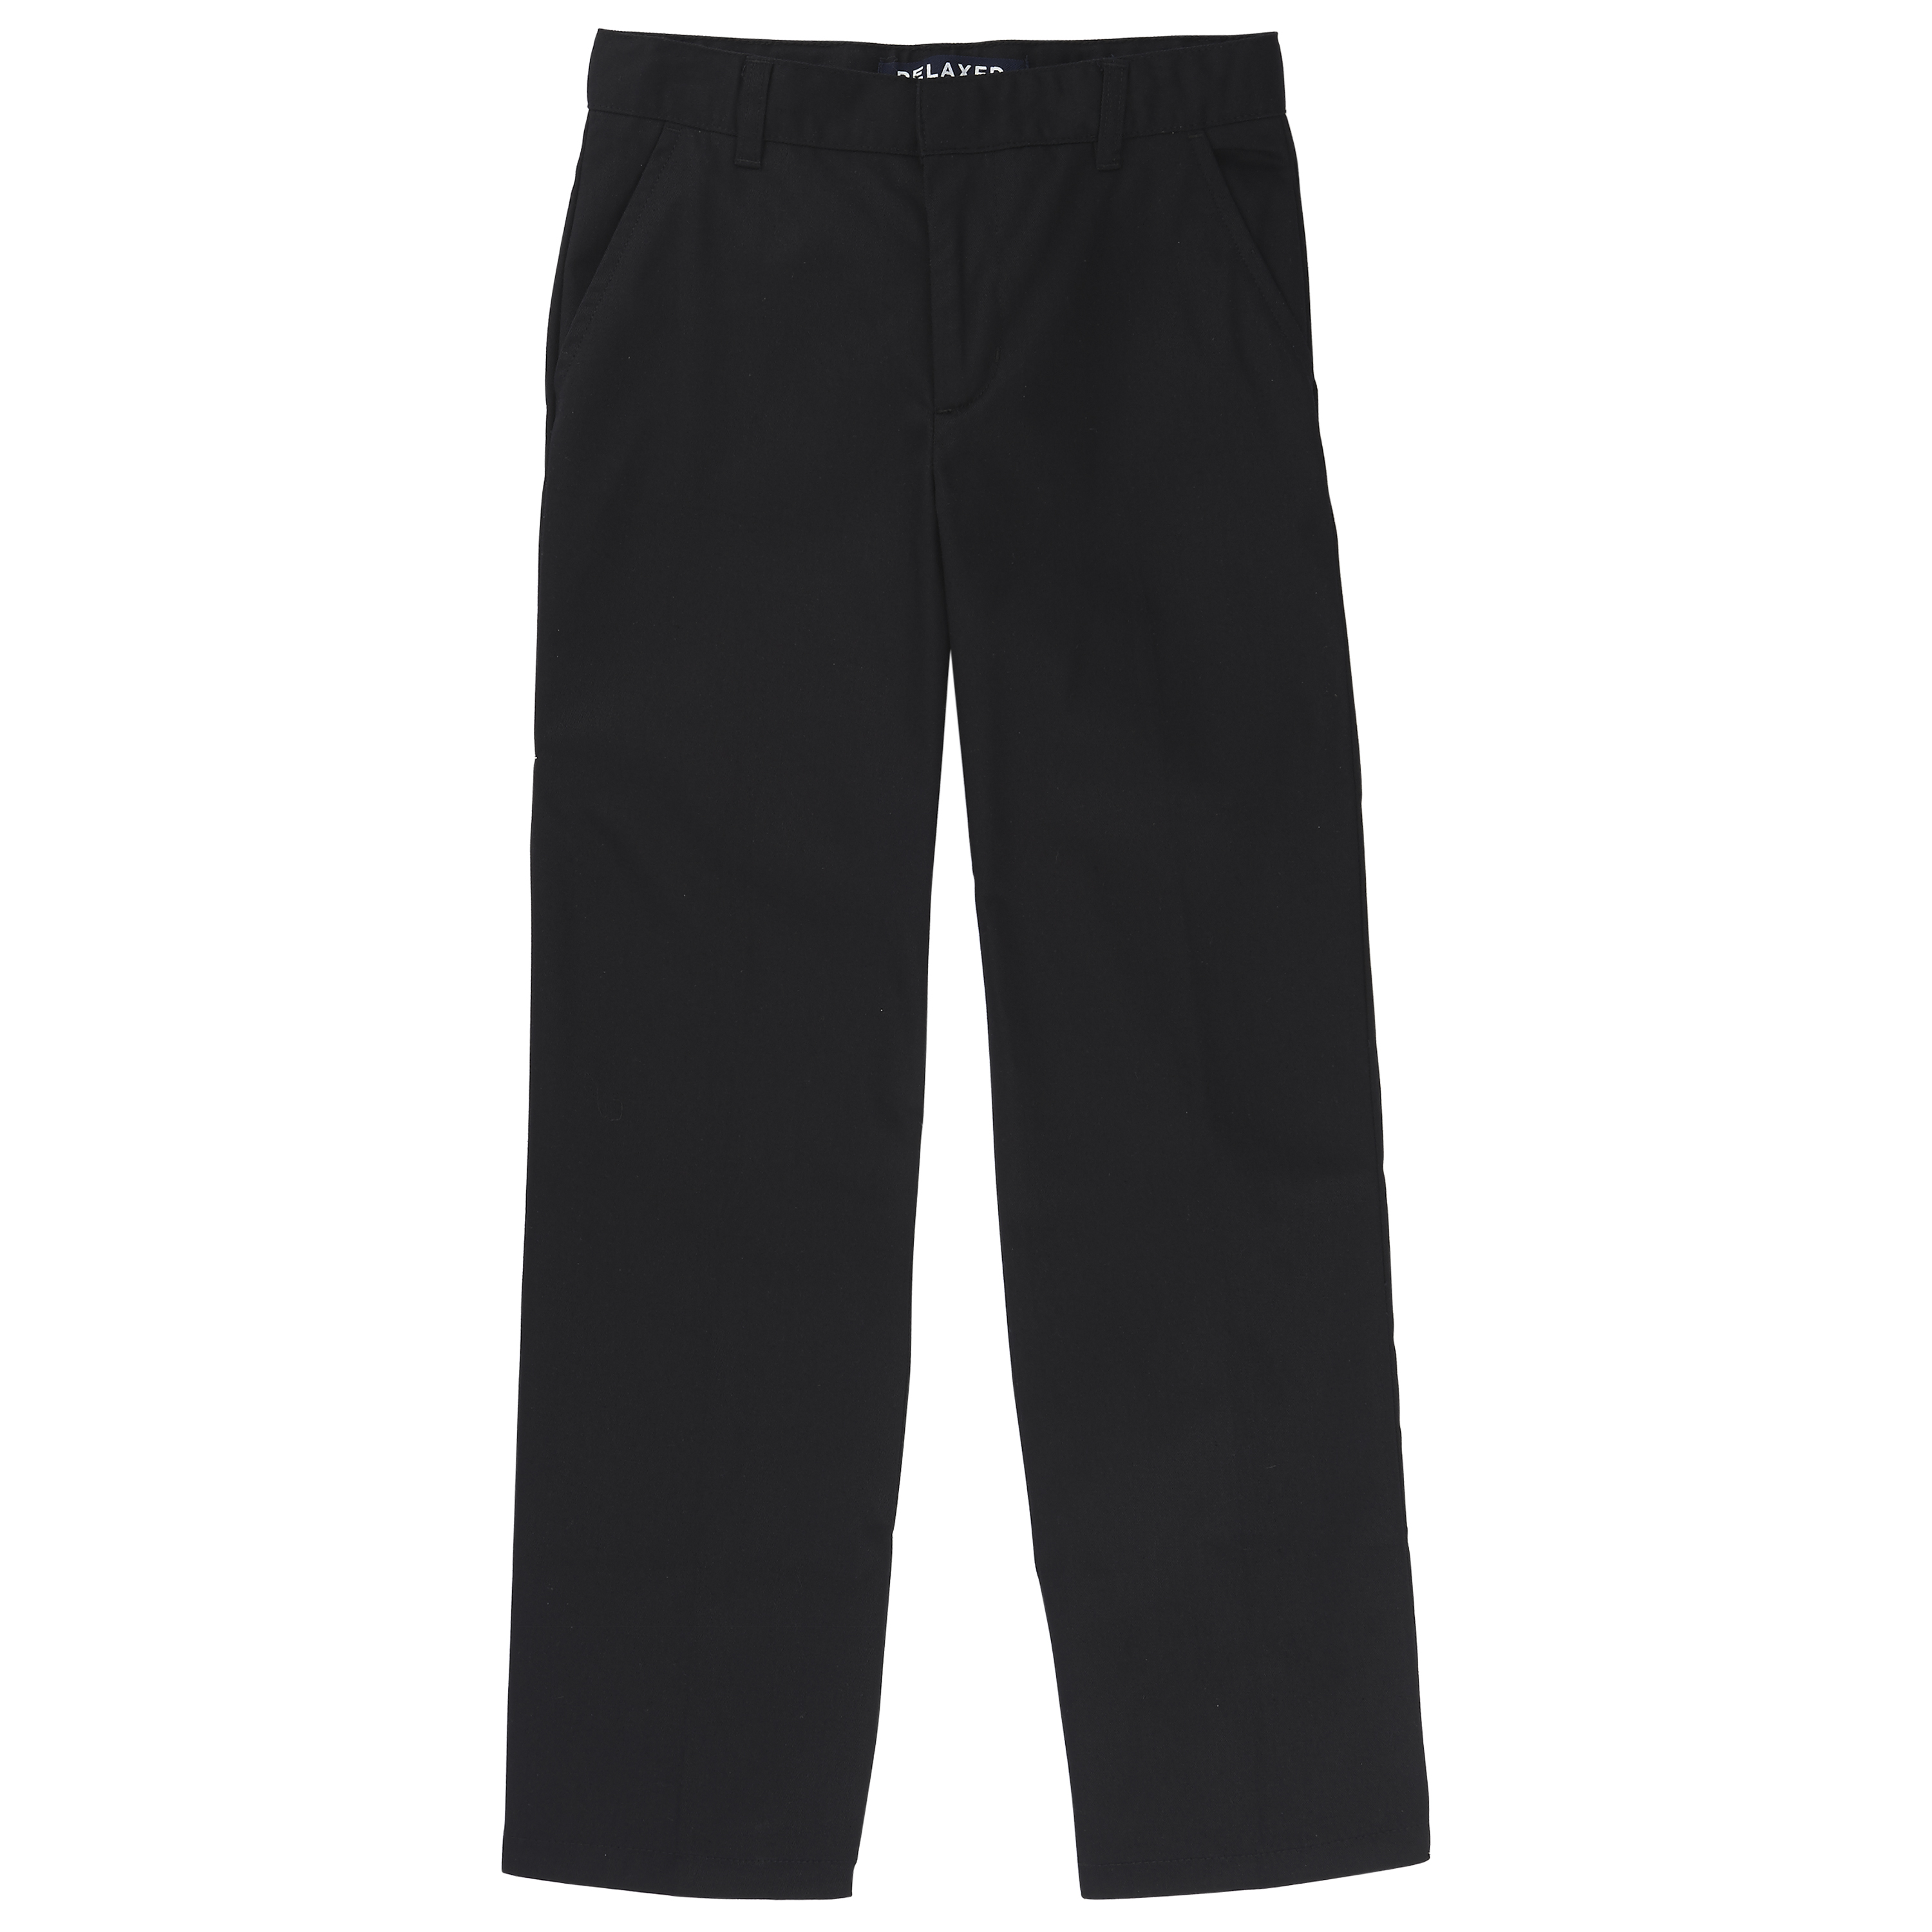 At School by French Toast Adjustable Waist Double-Knee Pant